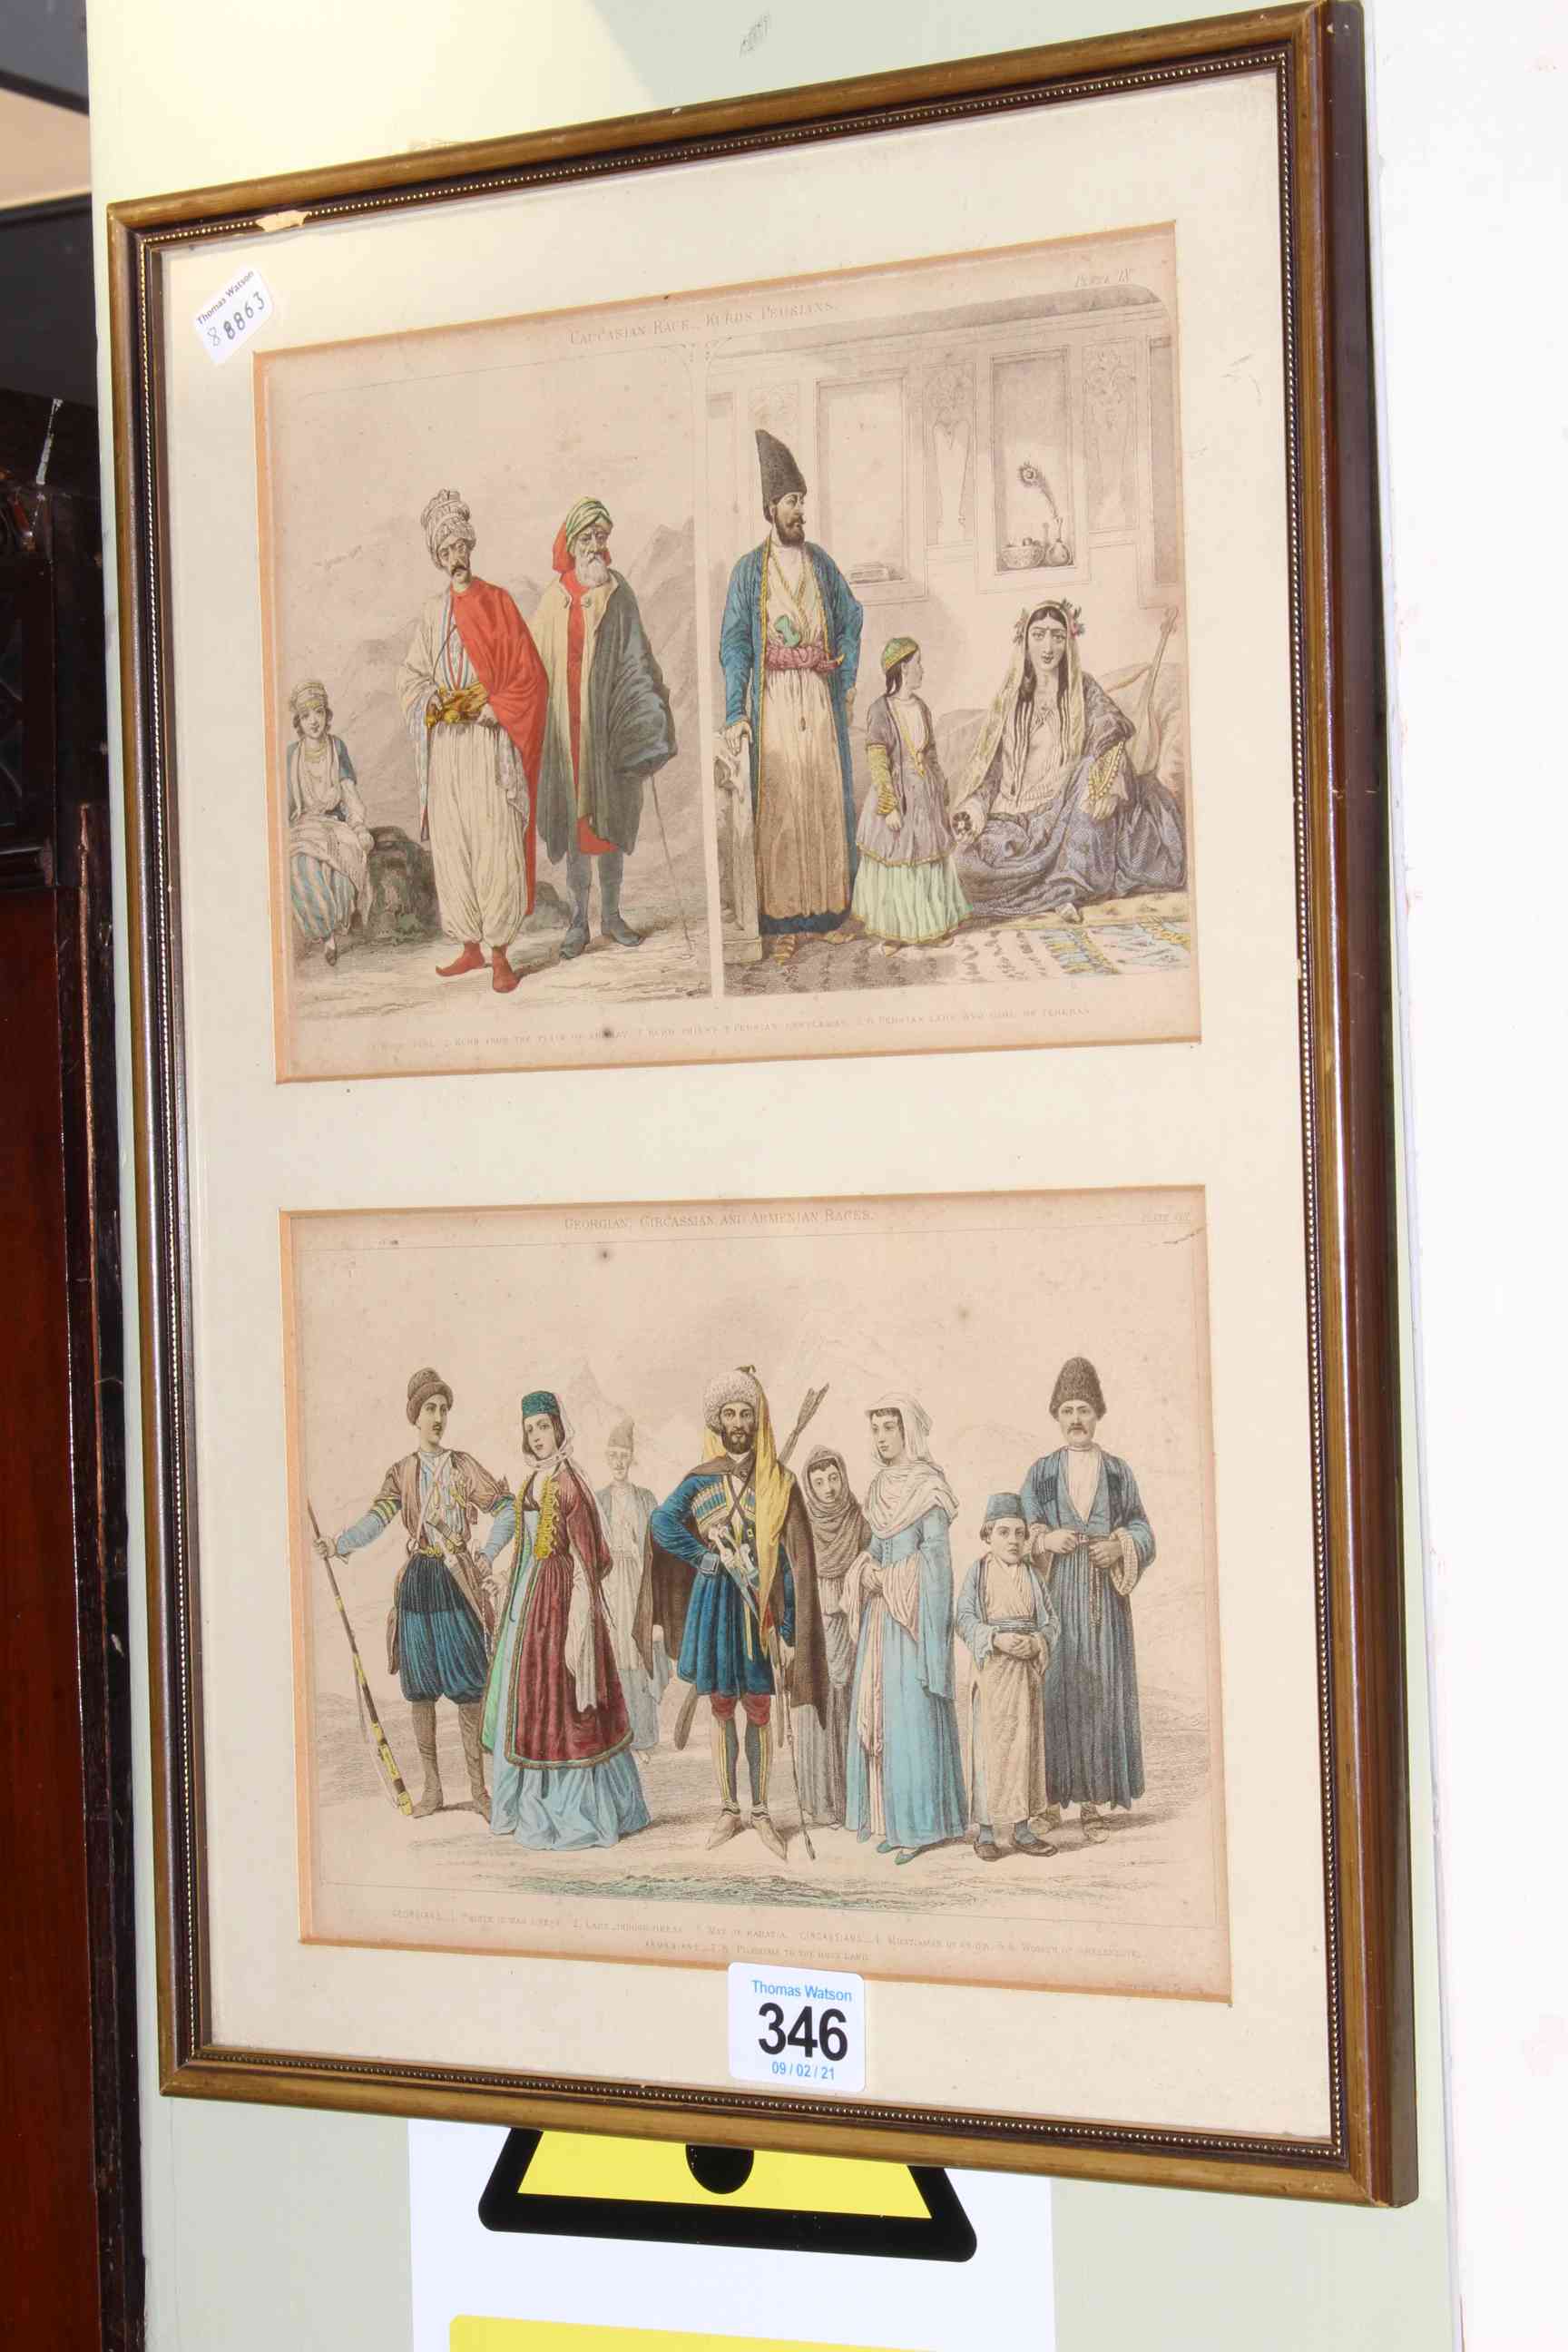 Framed engravings depicting traditional Armenians and Kurds, framed 39cm by 28cm overall.